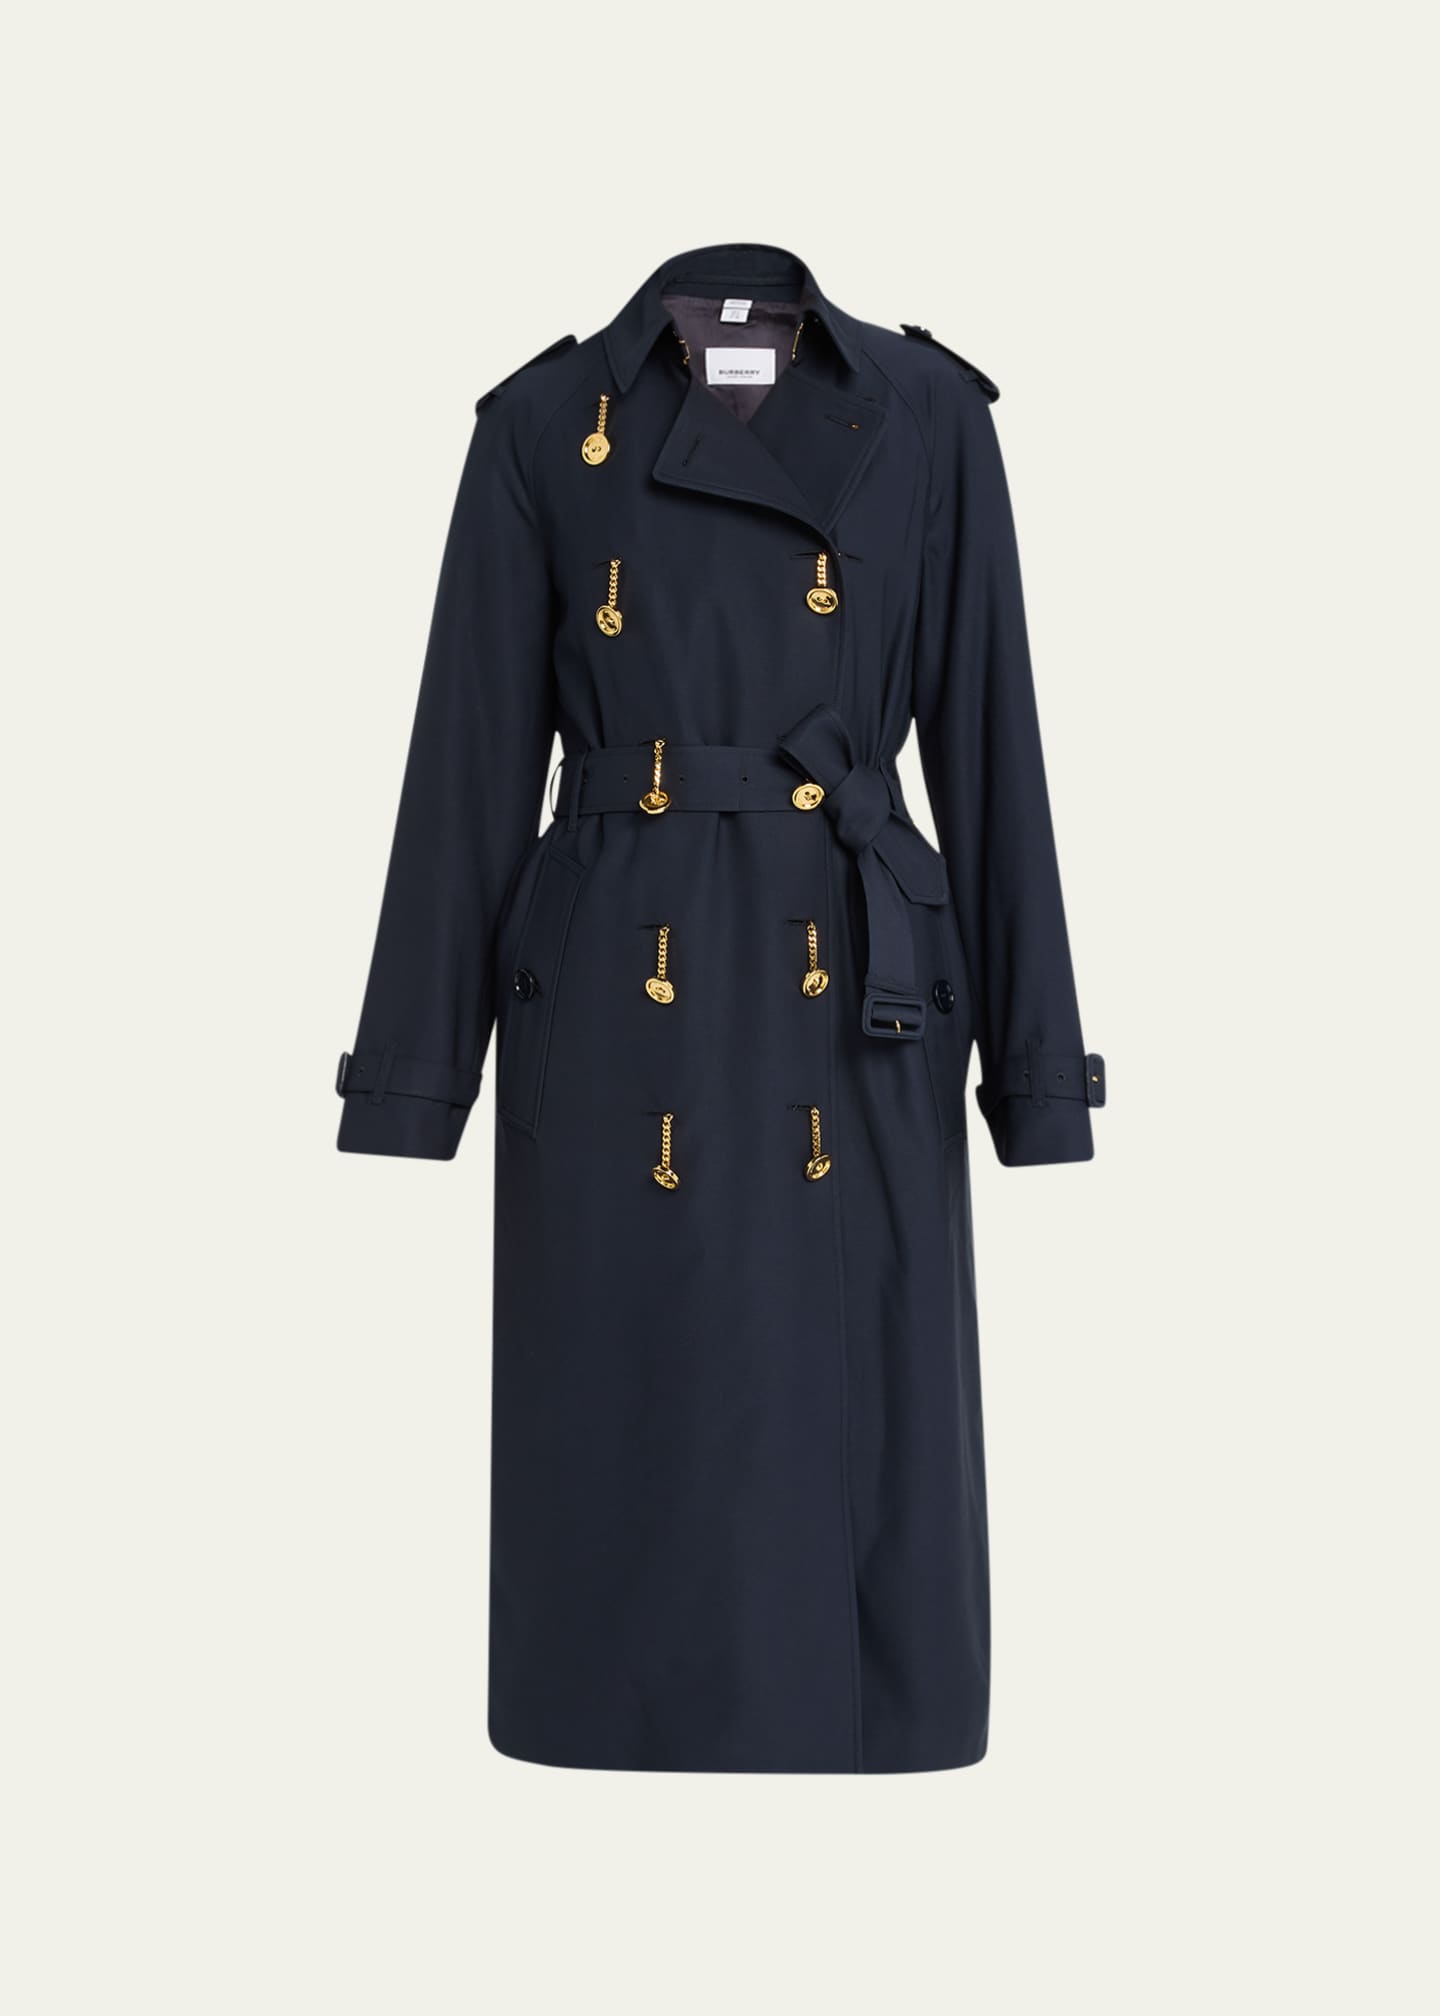 Burberry Trench Coat with Chain Button Detail Bergdorf